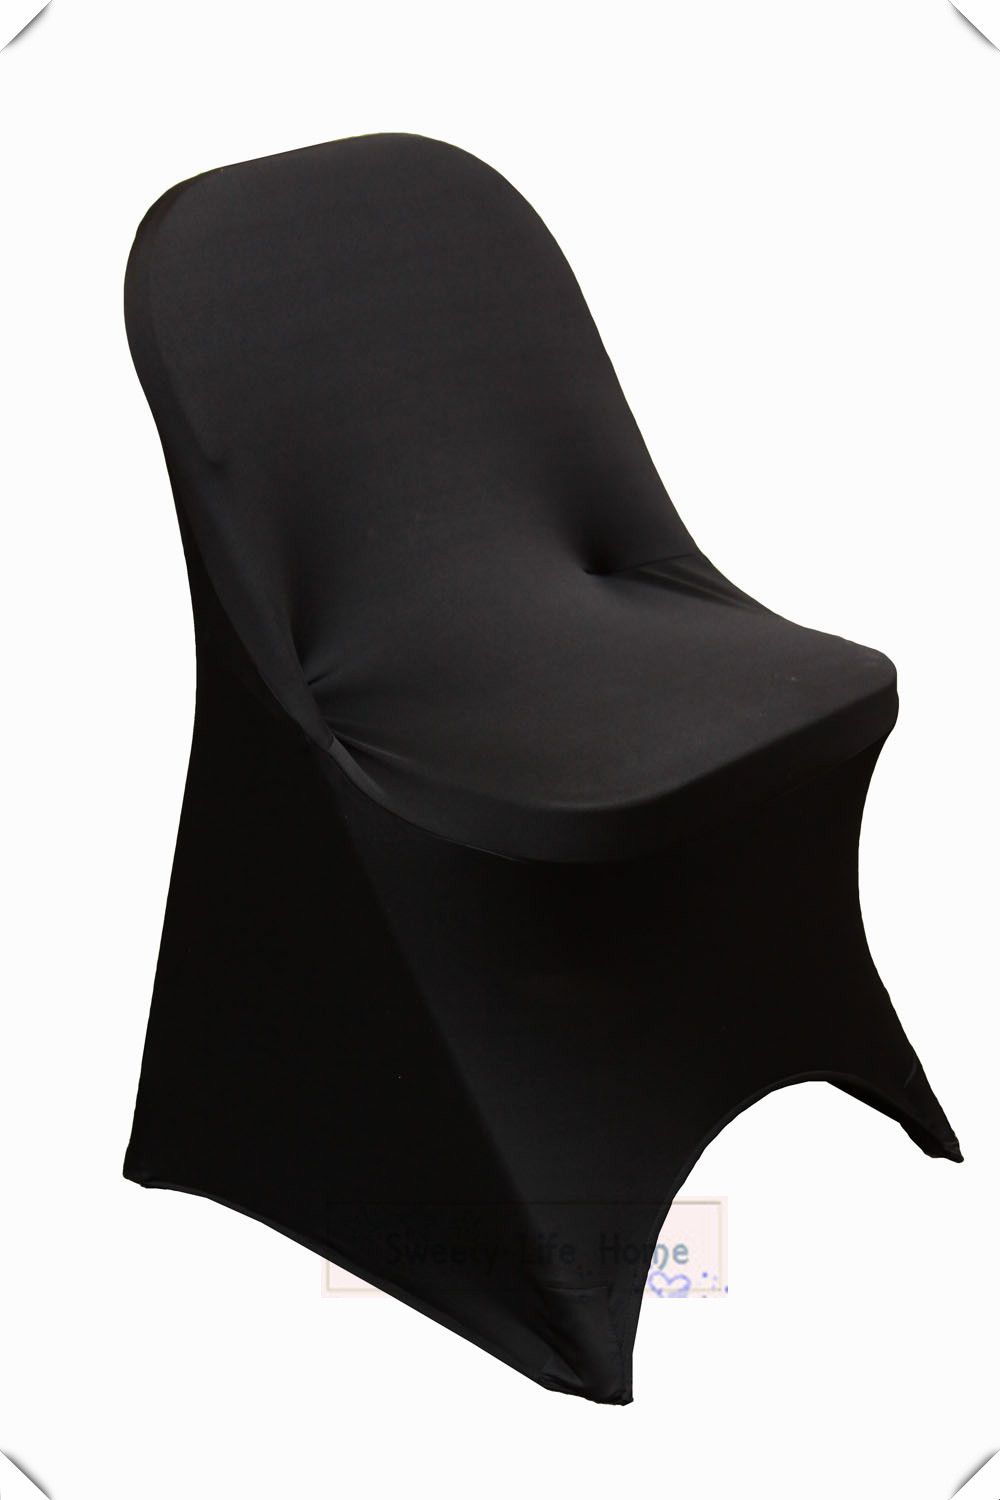 Folding Spandex Covers Black Chair Covers Elastic Banquet Chair Seats For Wedding Beach Chairs Party From Sweetylifehome 12 07 Dhgate Com